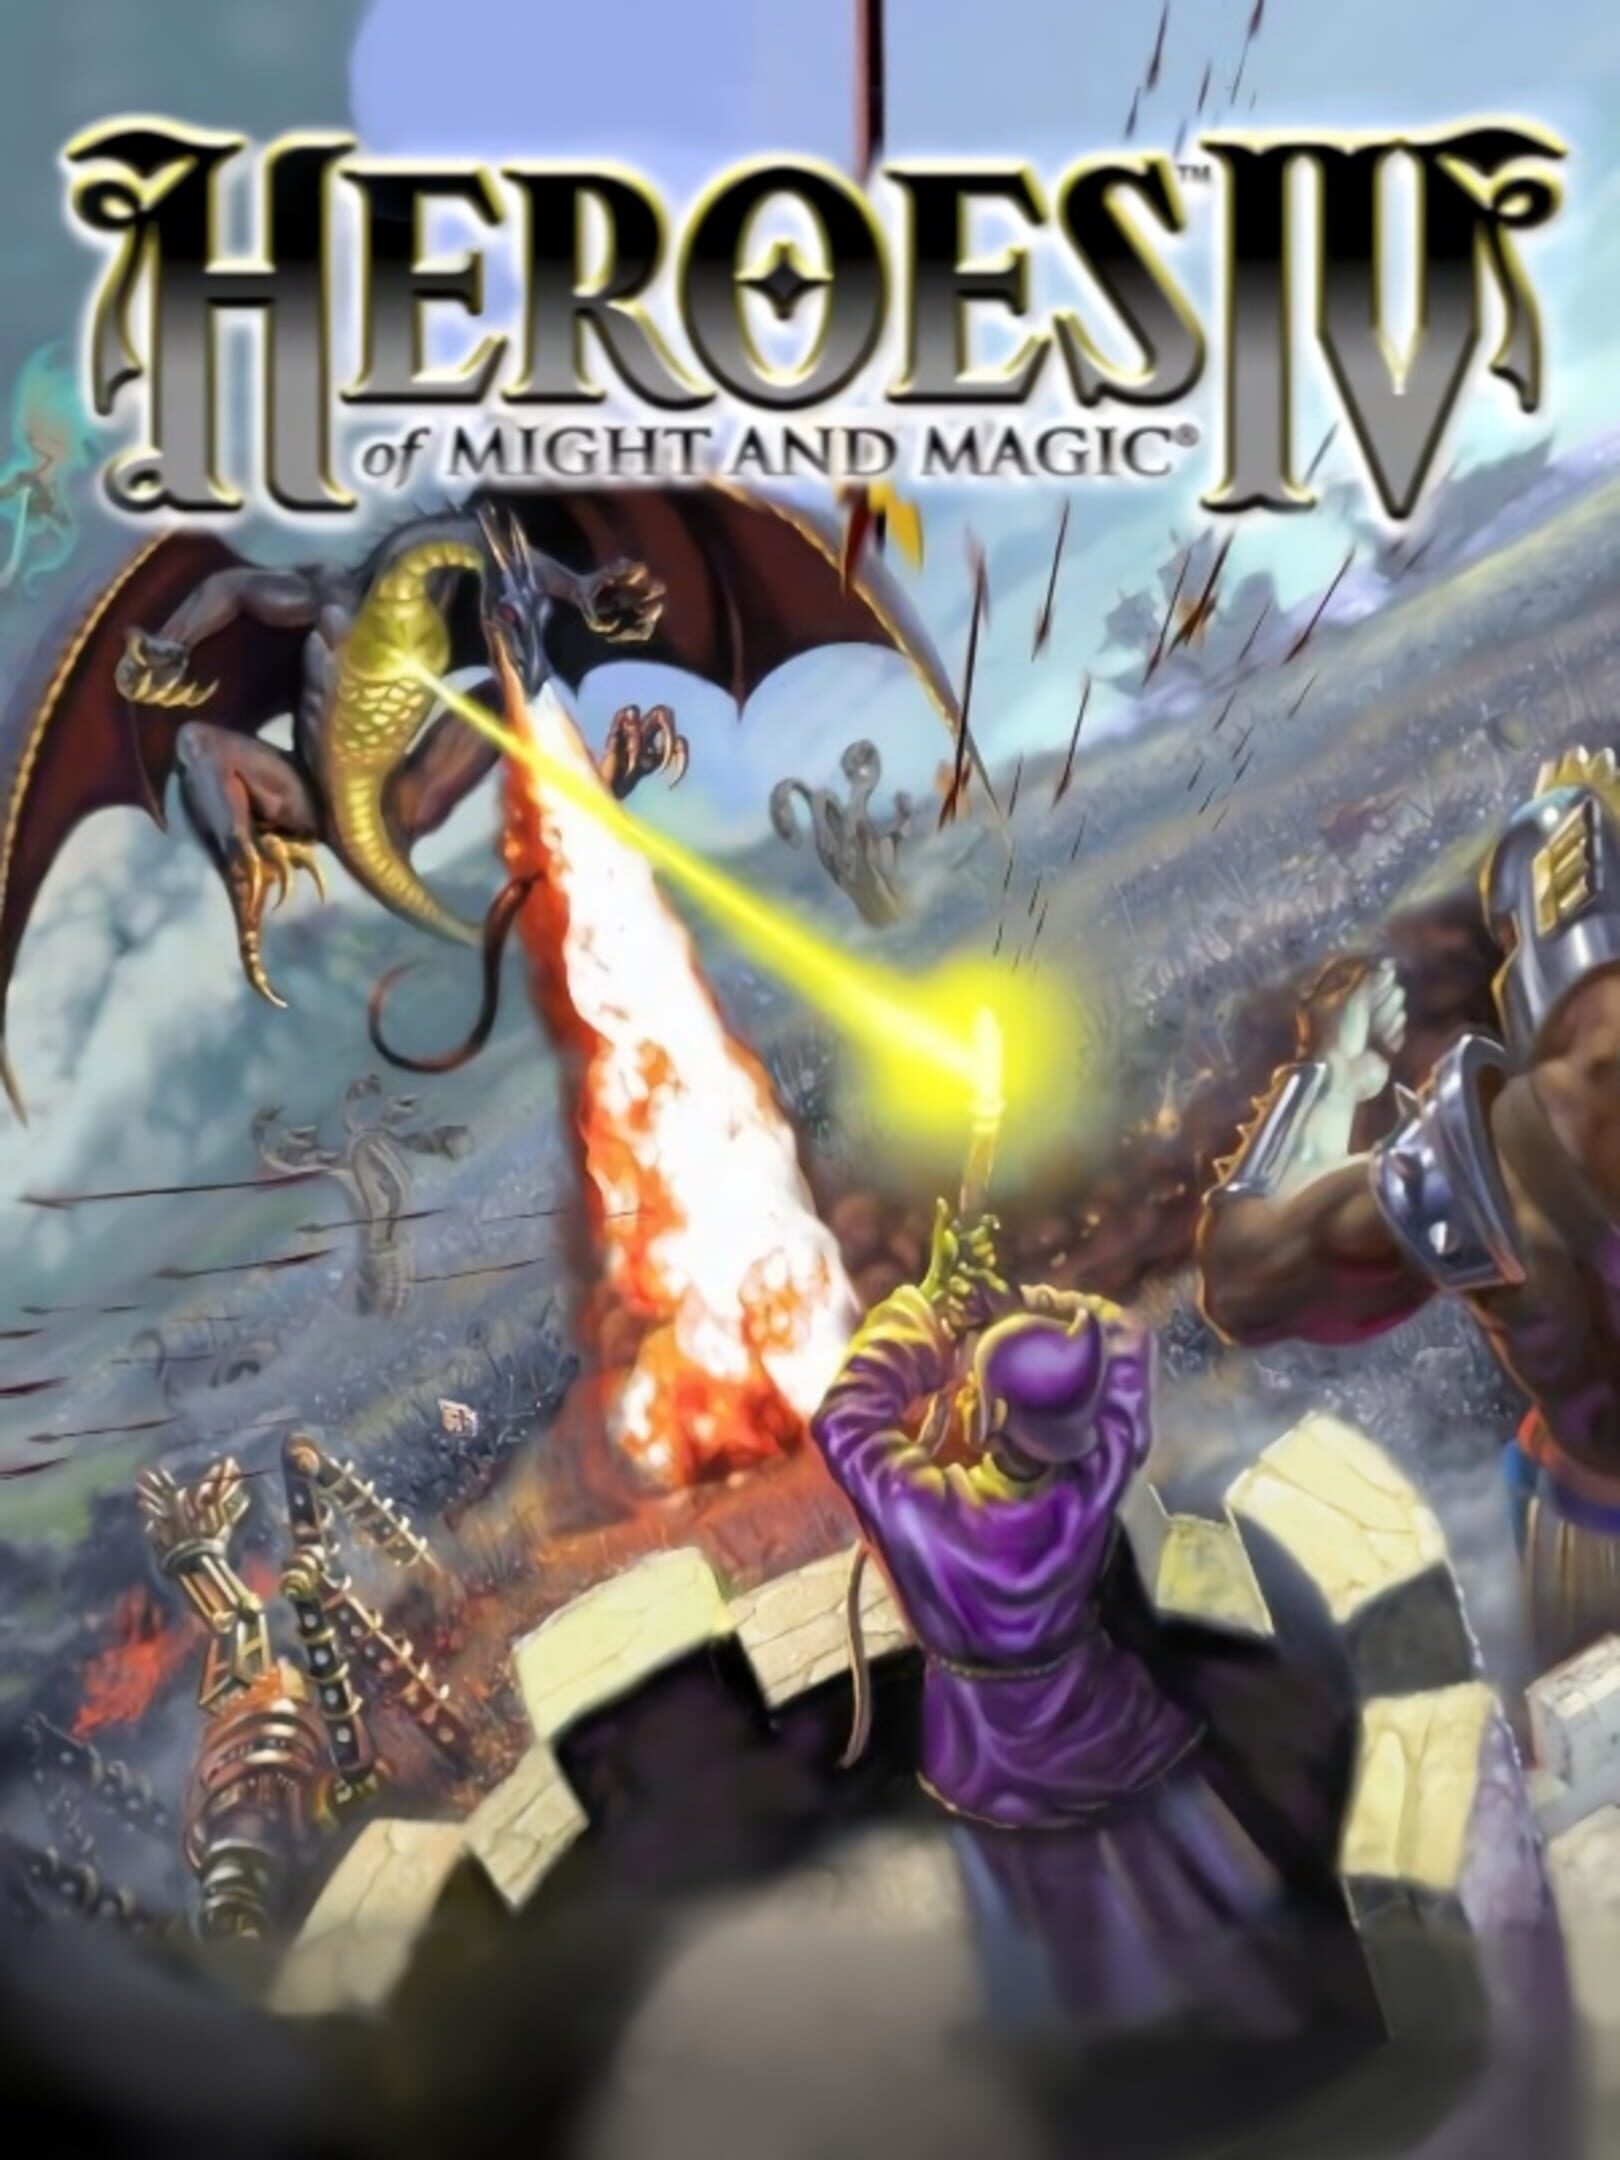 Heroes of might and magic 5 on steam фото 98